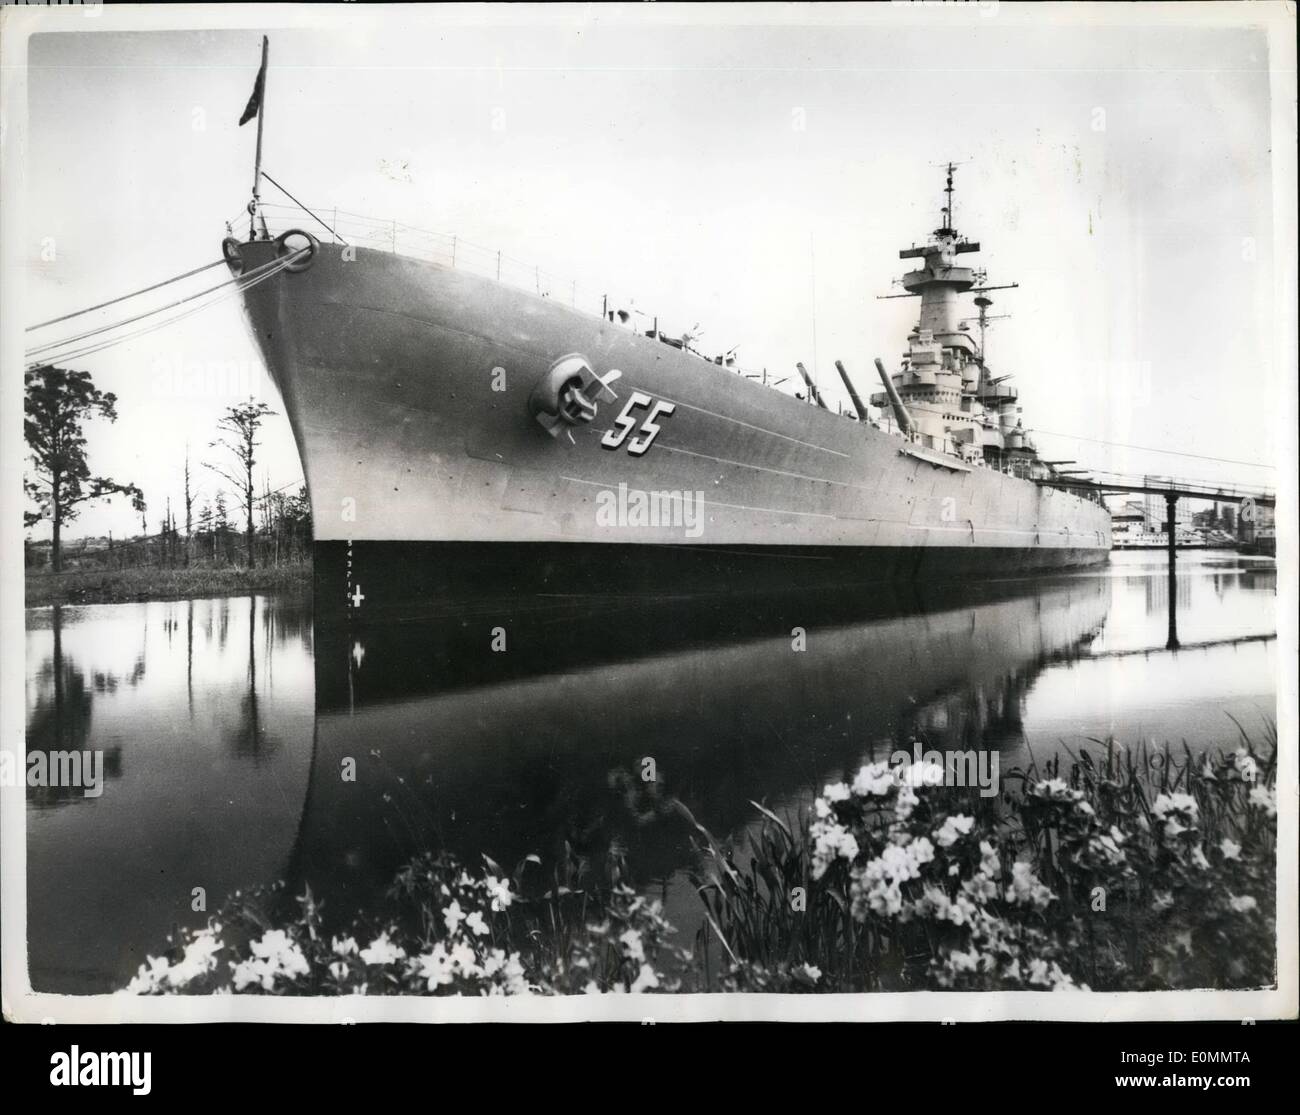 Mar. 03, 1956 - Citizens Buy 35,000 ton Battleship: In an unprecedented peace-Time transcation, citizens in a part of the United states have brought a 35,000 ton war-time battleship. The Unusual maneuver has taken place in North Carolina where the population of that state have contributed funds thorough public subscription to save the veteran man-of-war, U.S.S. North arolina from the scrap yards. The Vessell, commissioned in 19441, achieved fame in its twelve battles from Guadalcanal to Tokyo during World-war II Stock Photo